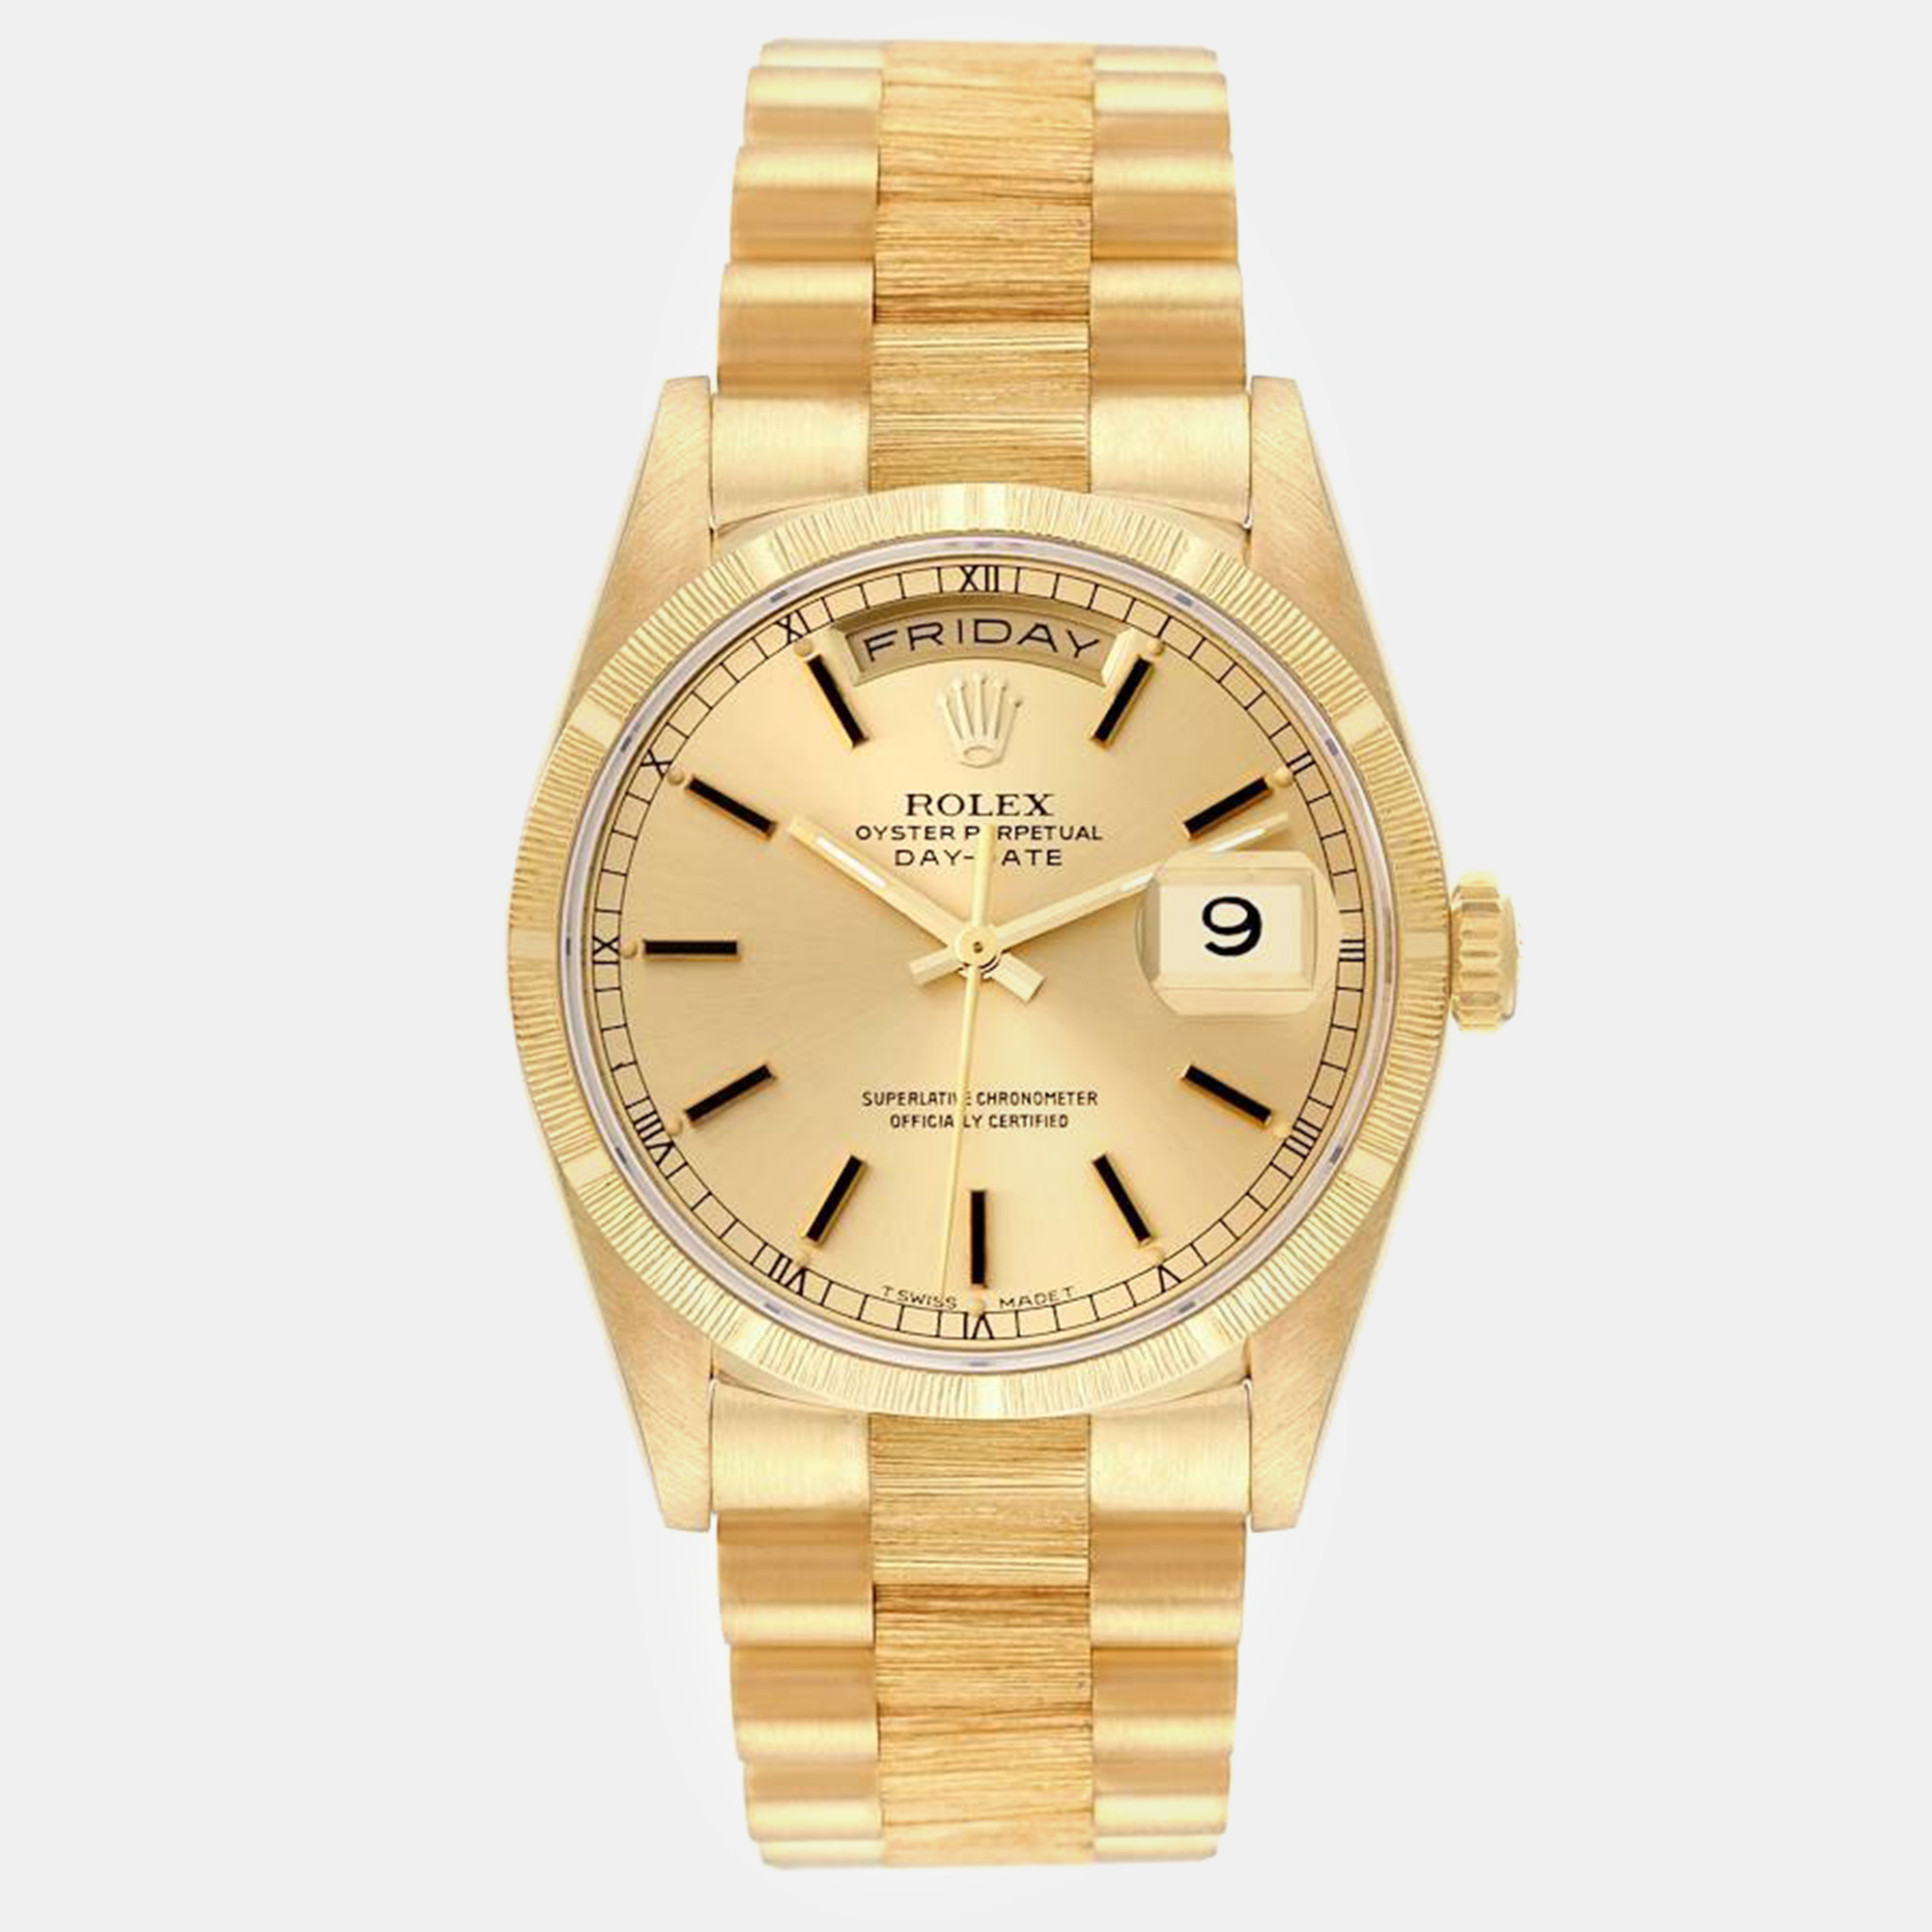 Rolex day-date president yellow gold bark finish mens watch 18248 36 mm